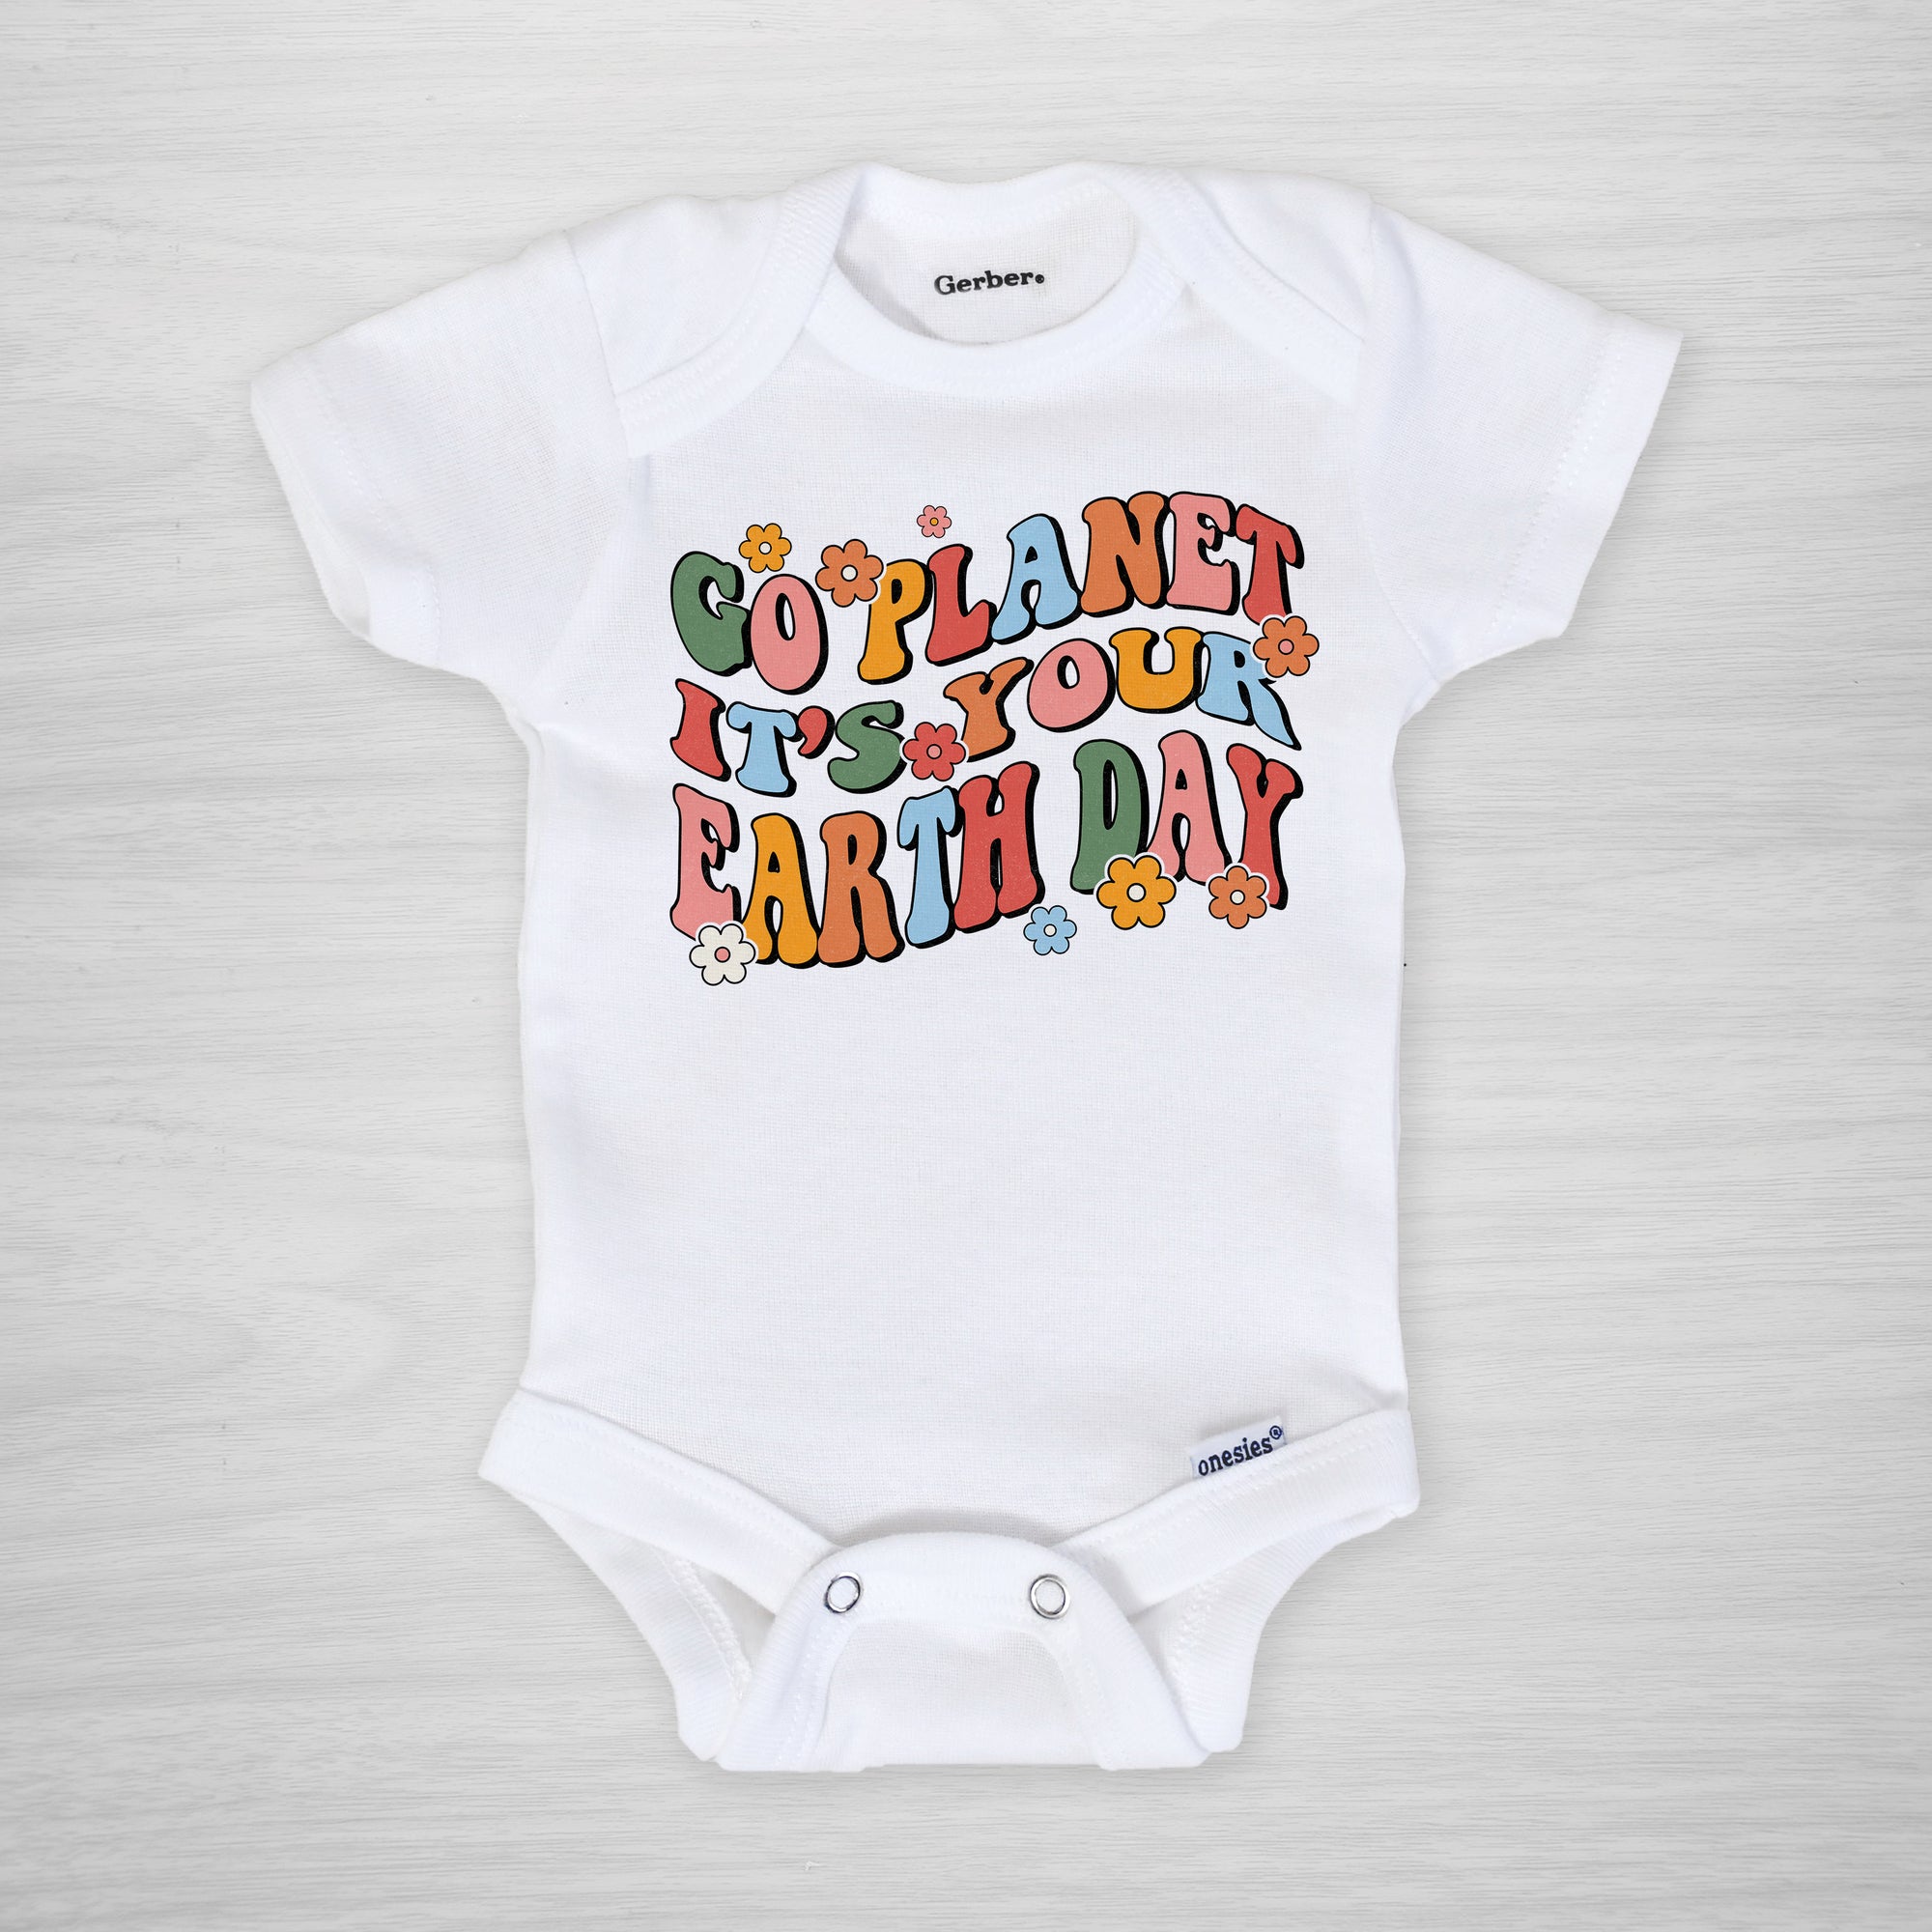 Earth Day onesie, short sleeved, "Go Planet, it's your Earth day"